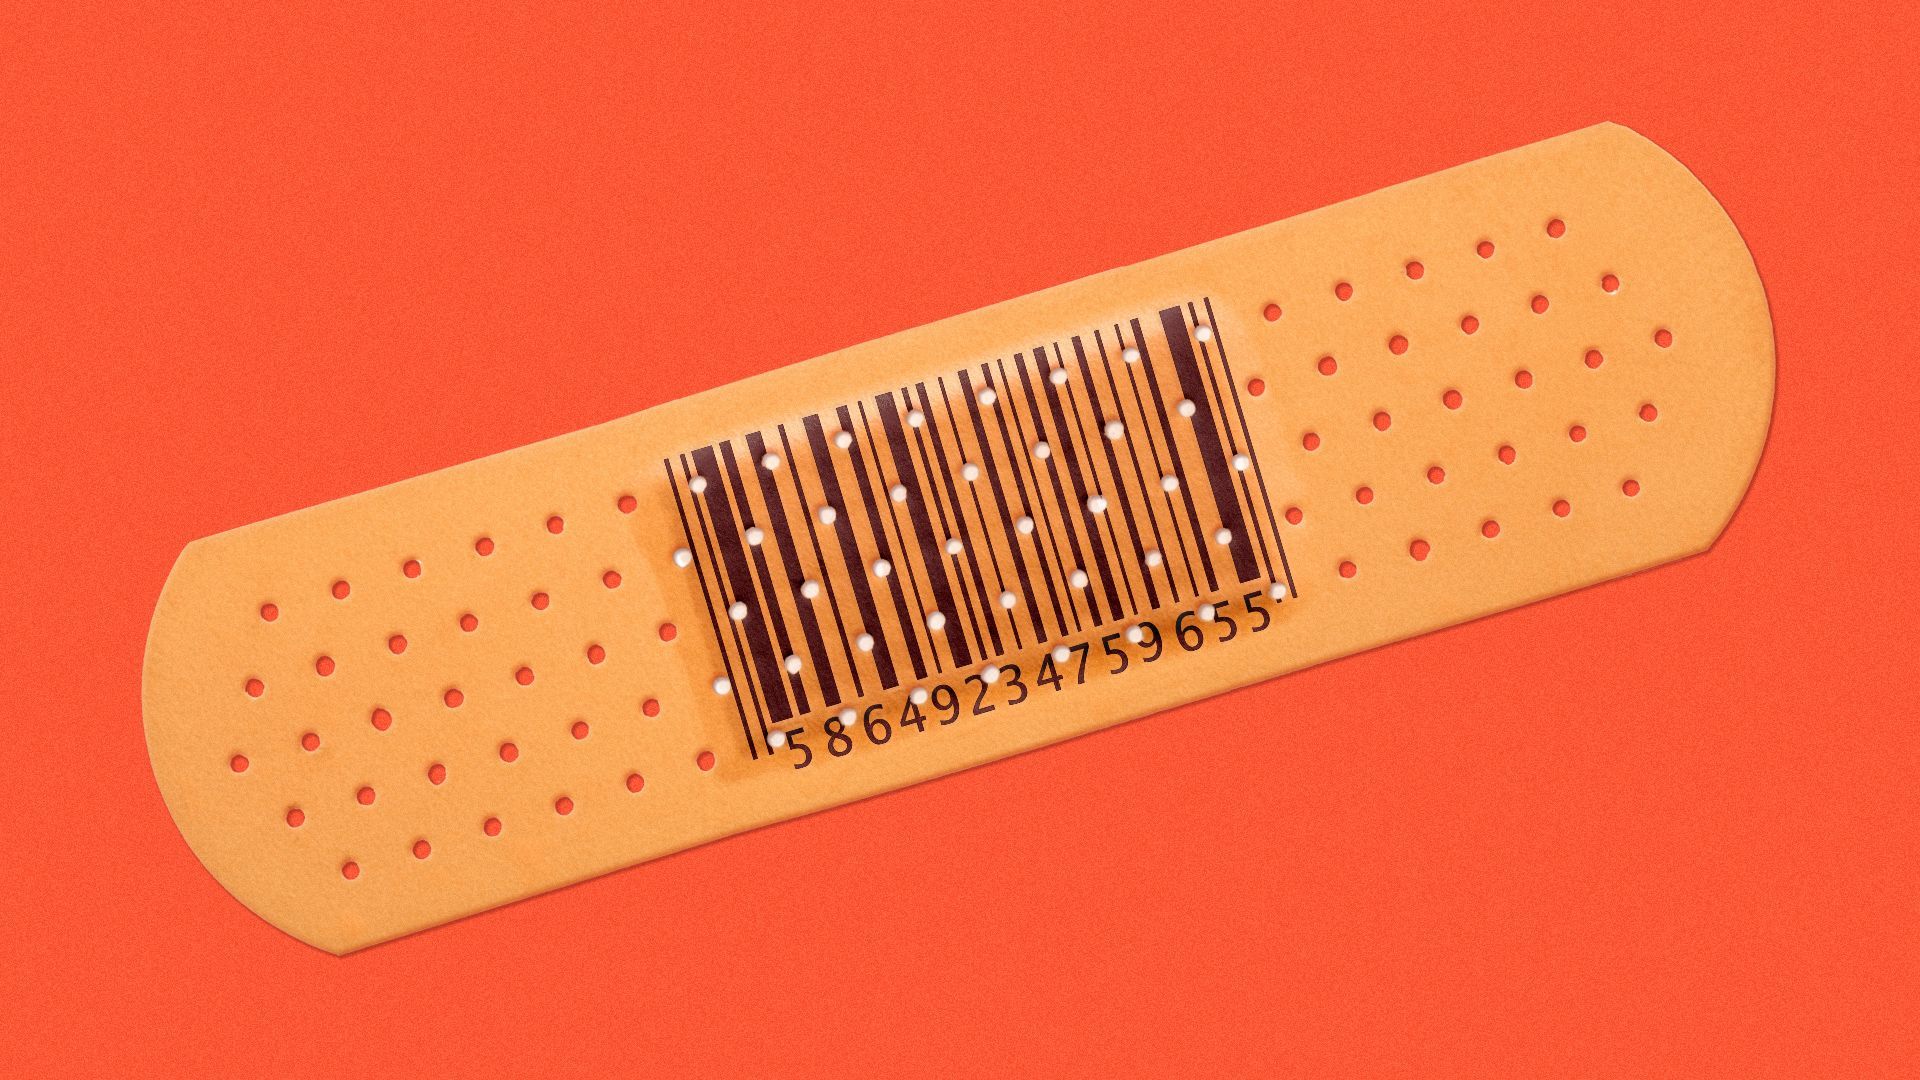 Illustration of a bandaid with a barcode in the middle area.